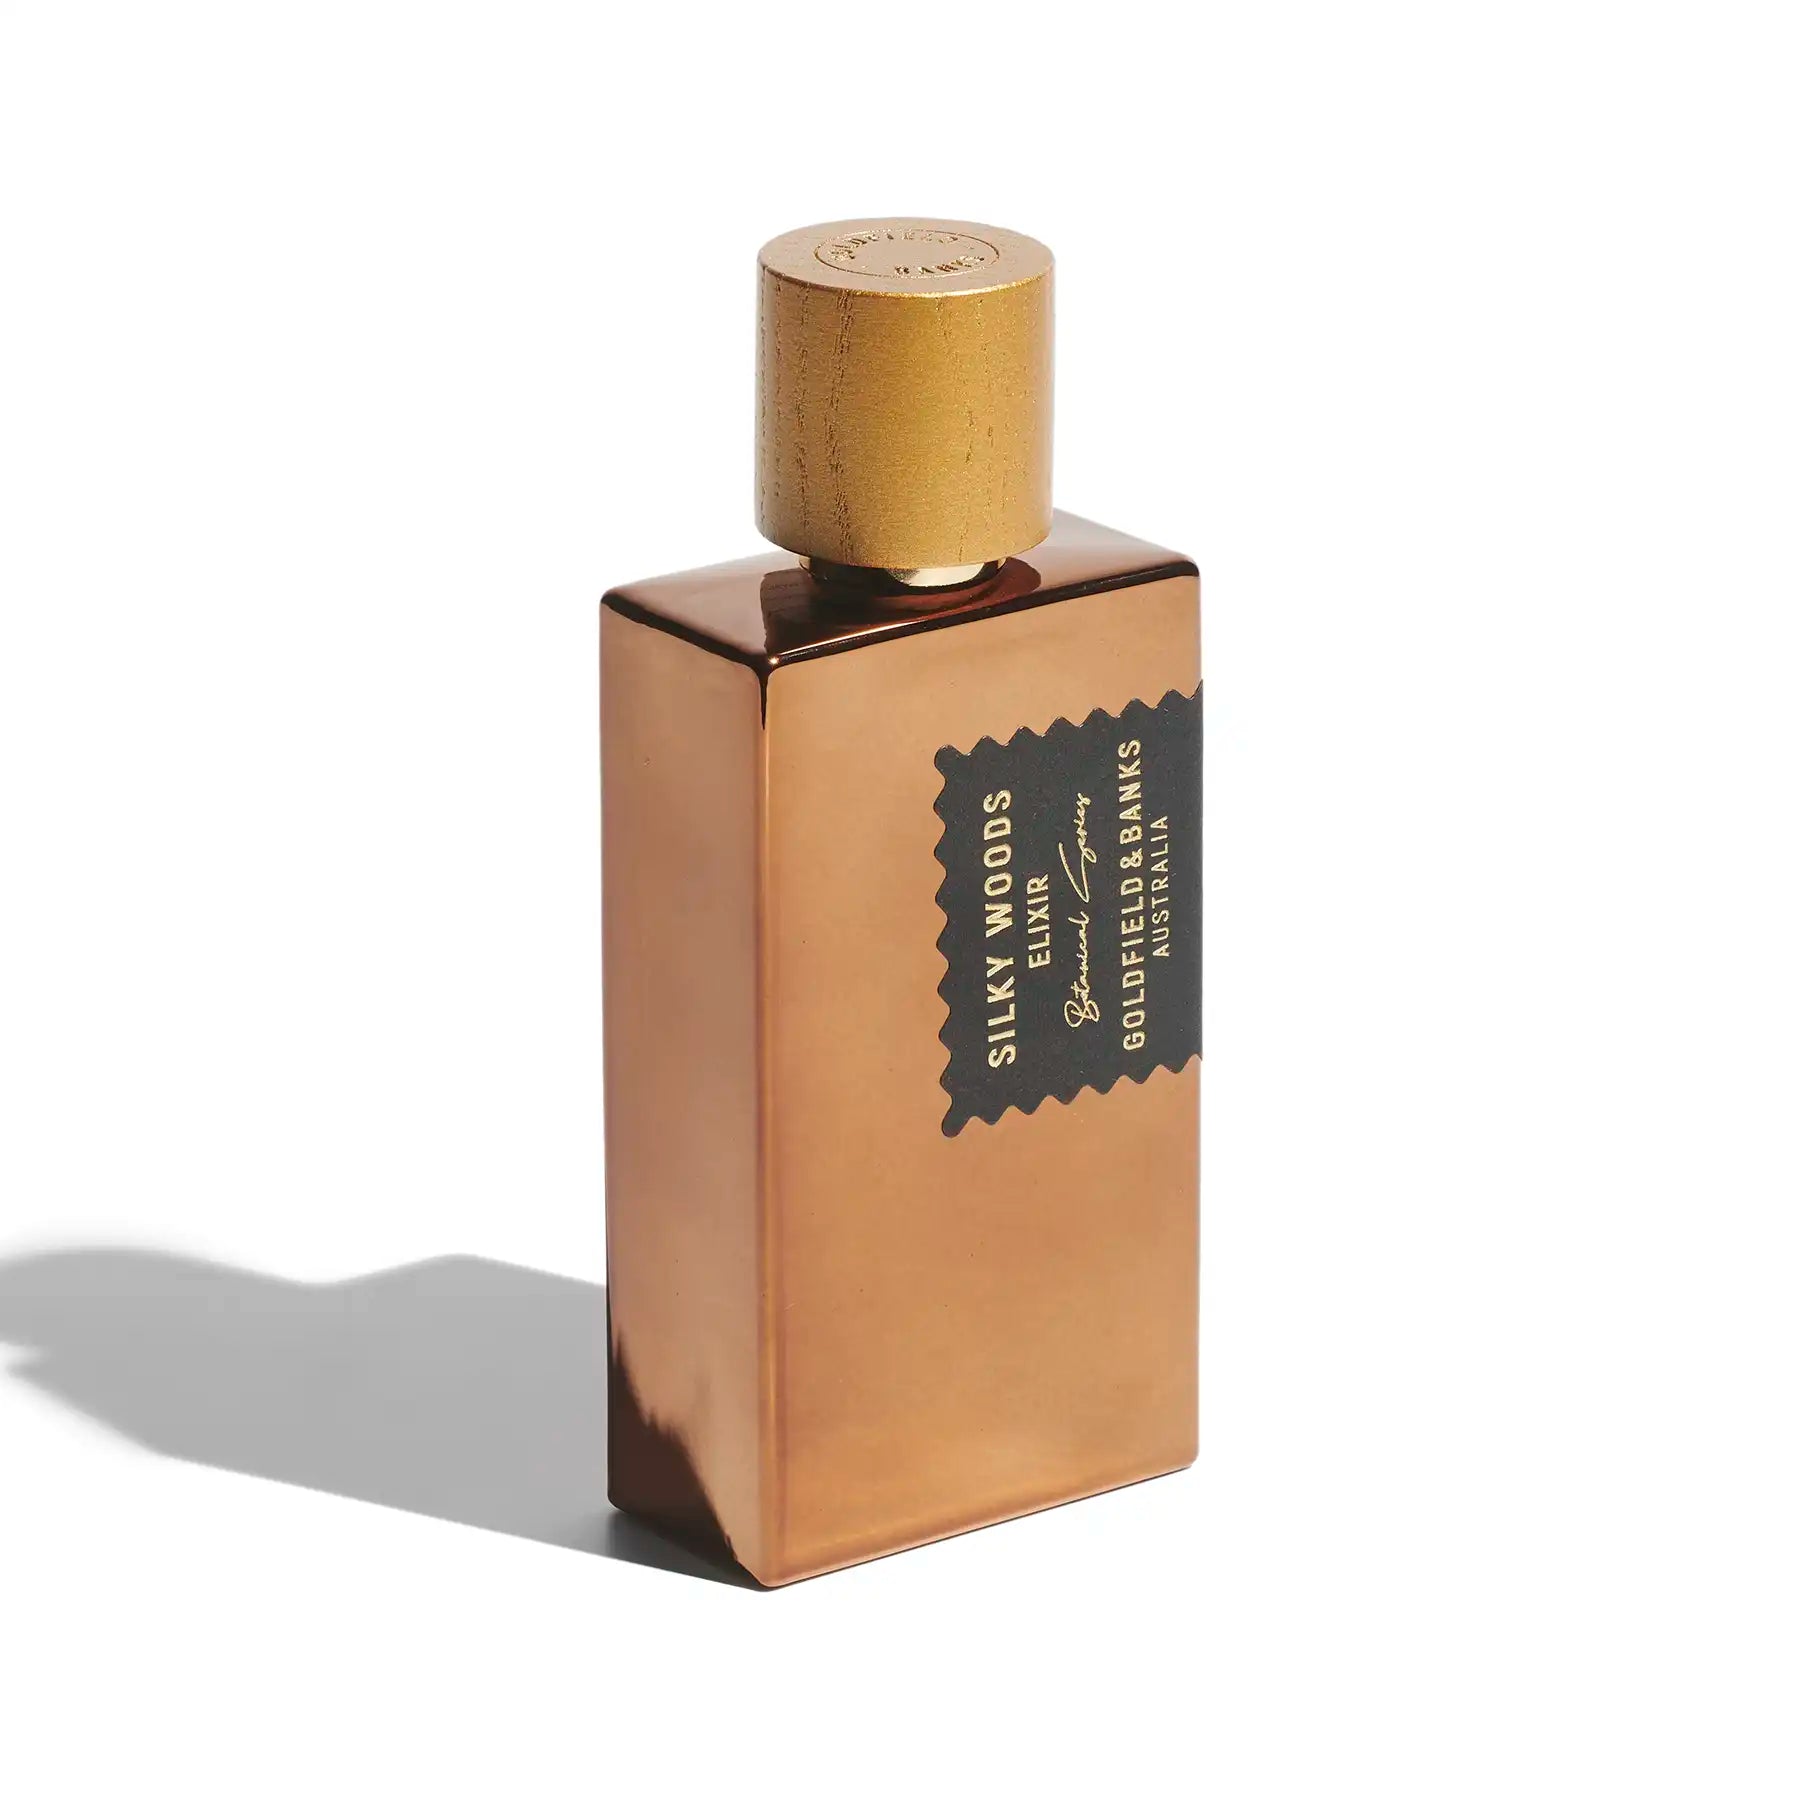 Woody and Gourmand Fragrance